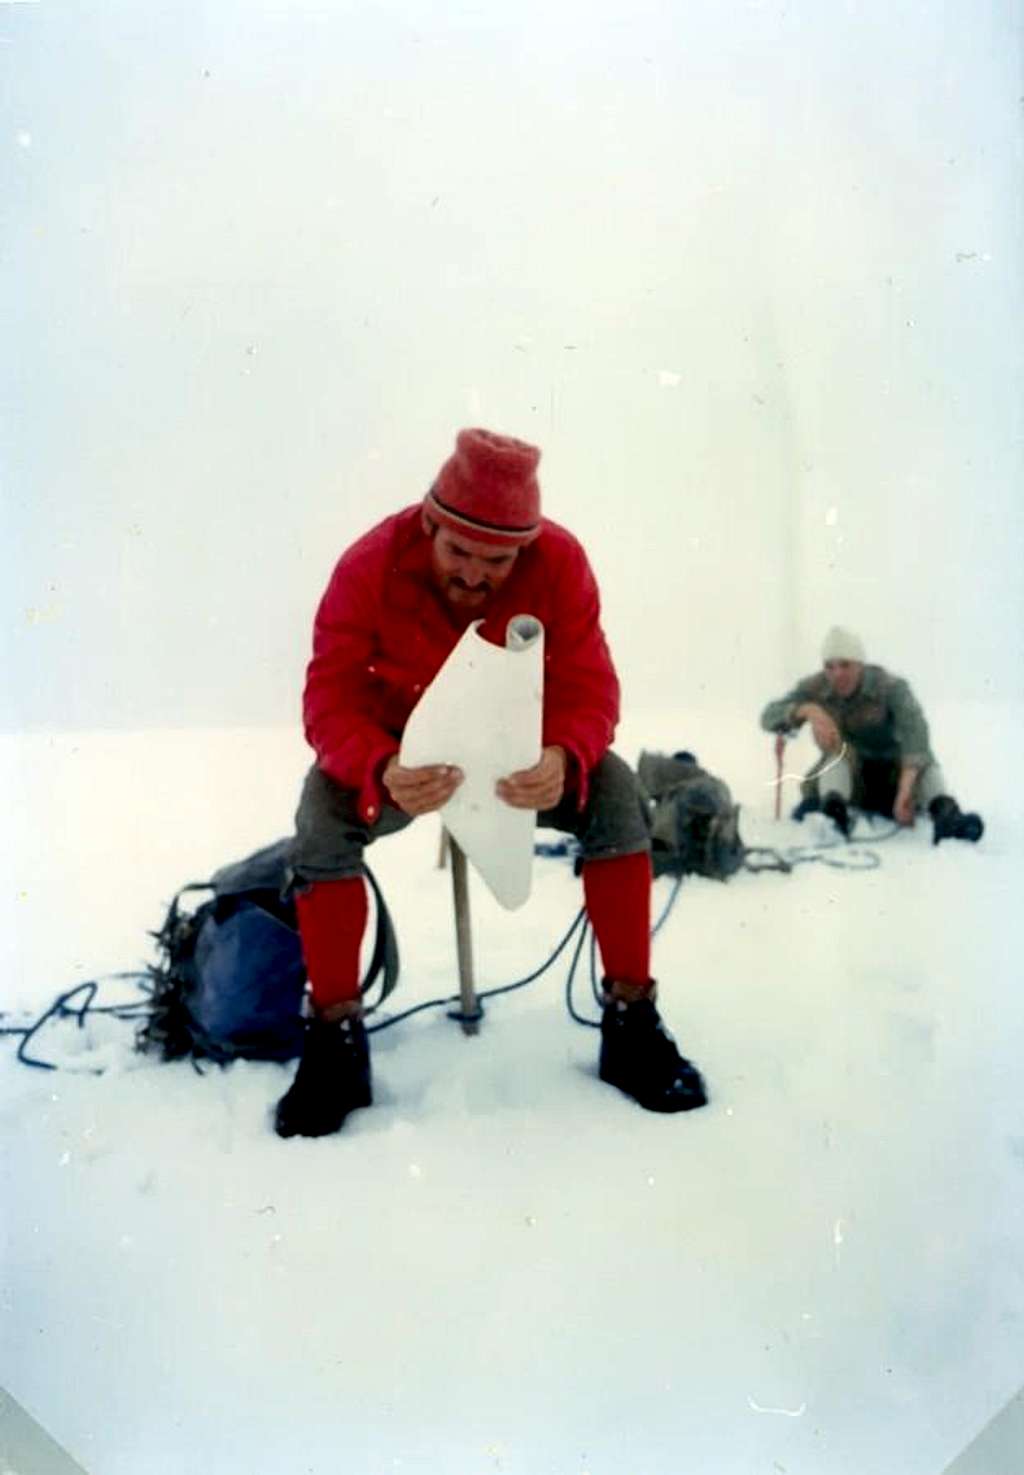 Mont Velan (3734 m) on the OUTWARD JOURNEY in the STORM RETURN in the FOG 1975